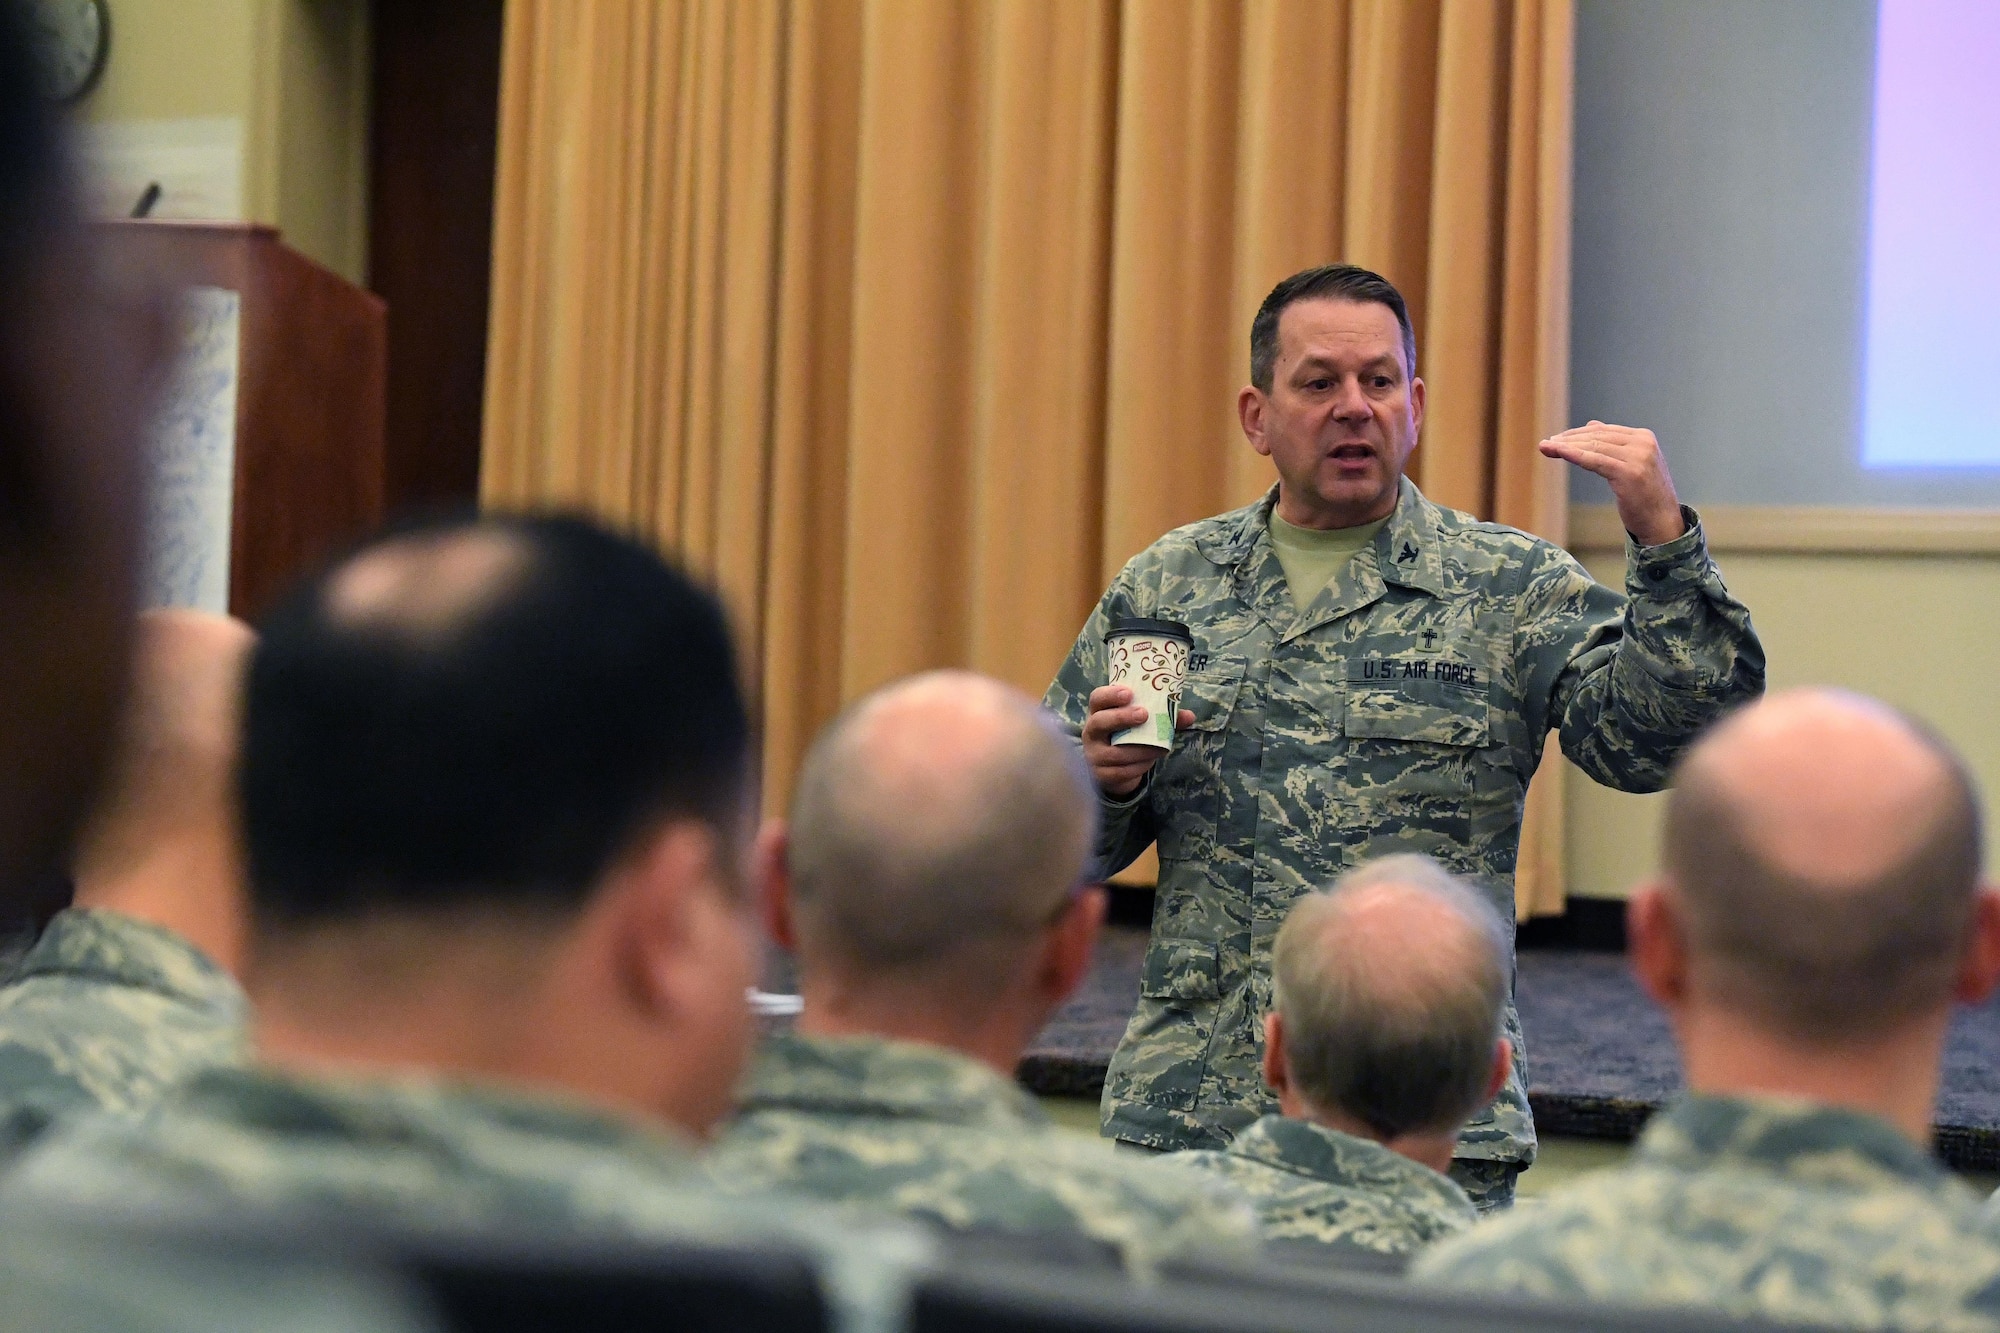 Chaplain (Col.) Timothy Butler, Air Combat Command Chaplain, speaks to chaplains from across the command at an ACC Chaplain Corps Leadership Development Symposium Dec. 8, 2016. The idea for the symposium formed when the command chaplains and their assistants from each of three MAJCOMs involved – USAFE, AETC and ACC – discovered they were all contemplating the same idea: how to improve leadership within the chaplain corps. (U.S. Air Force photo by Staff Sgt. Nick Wilson)